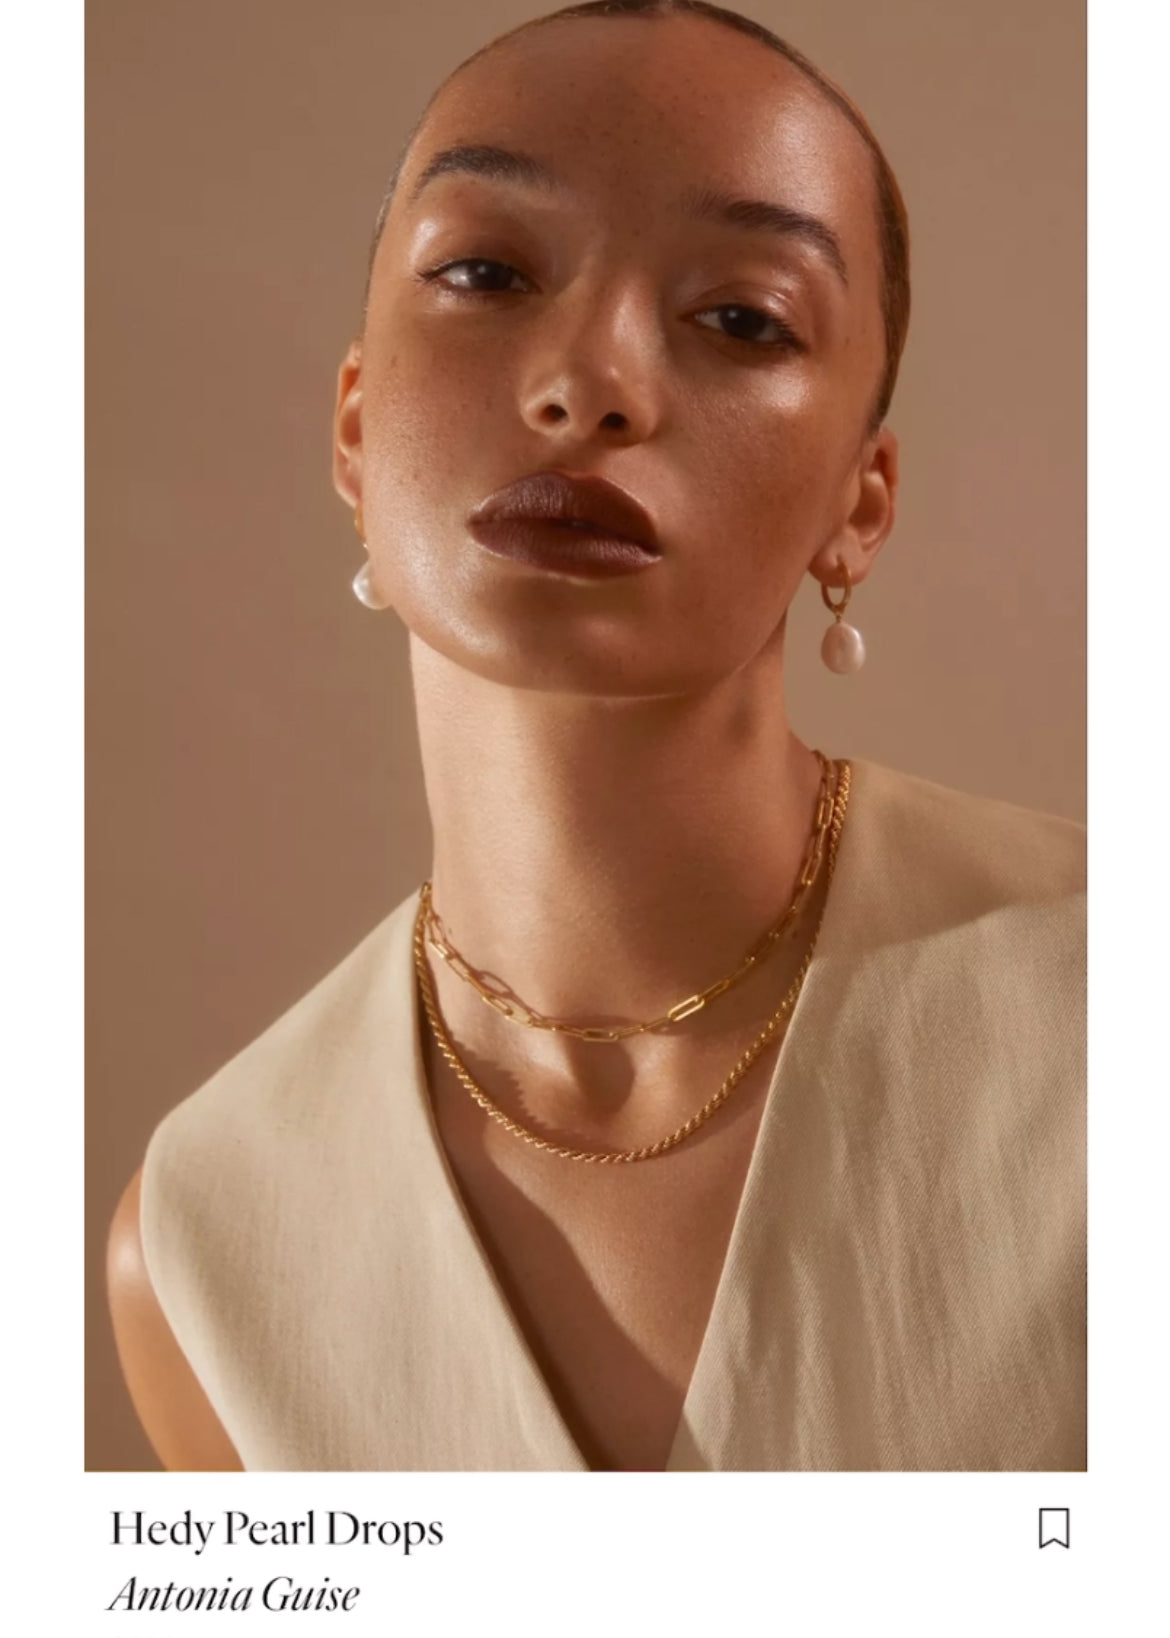 Screenshot of Sheerluxe Mothers day gift guide inclusion with image of model wearing Hedy Pearl Drops and other Antonia Guise jewellery